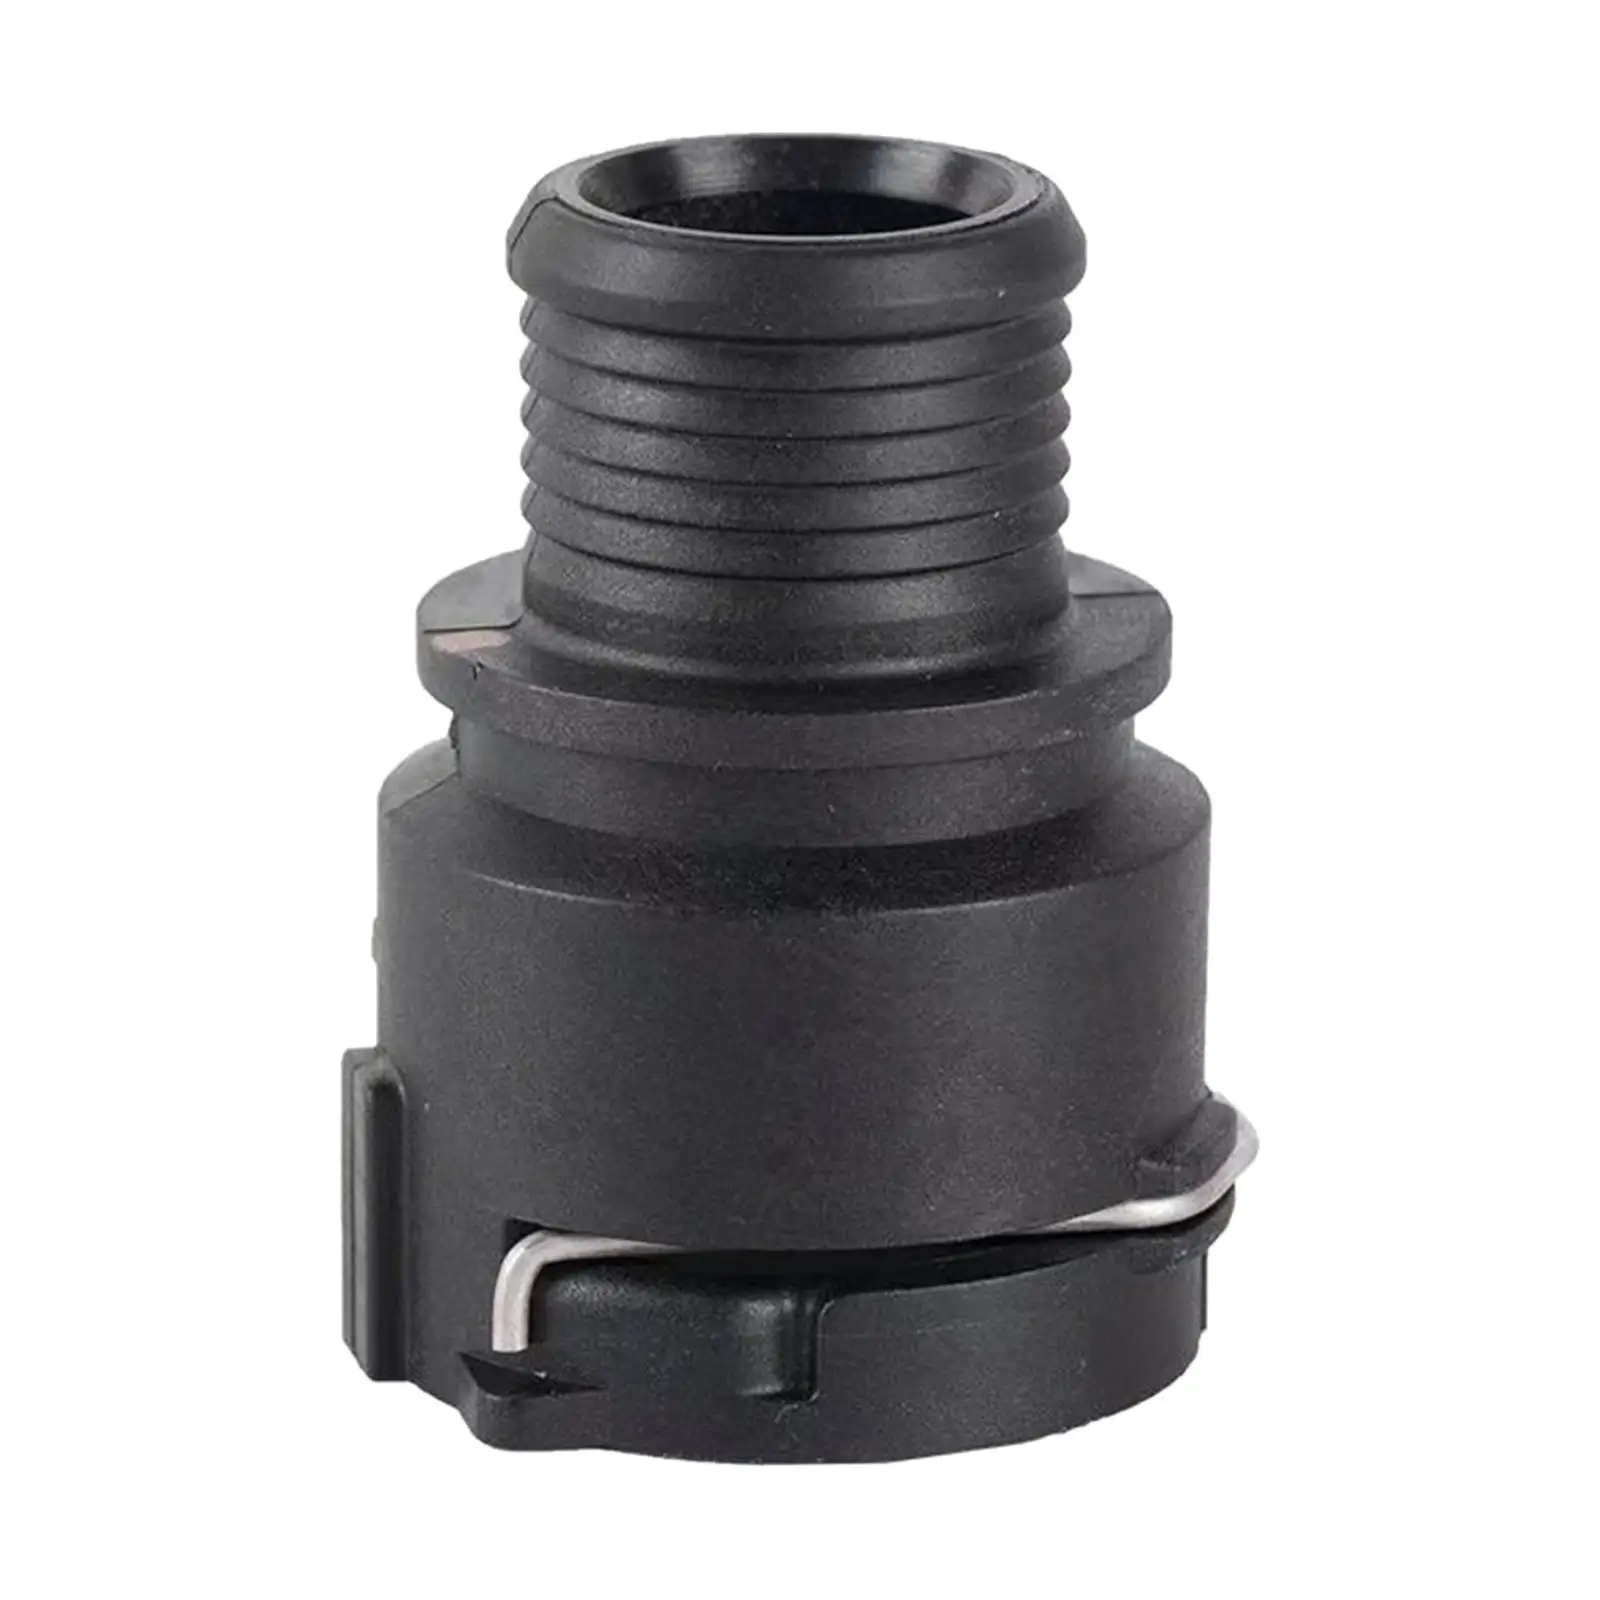 Replacement Heater Inlet Hose Connector Replace Parts 95089363 95089364 Convenient Installation Black